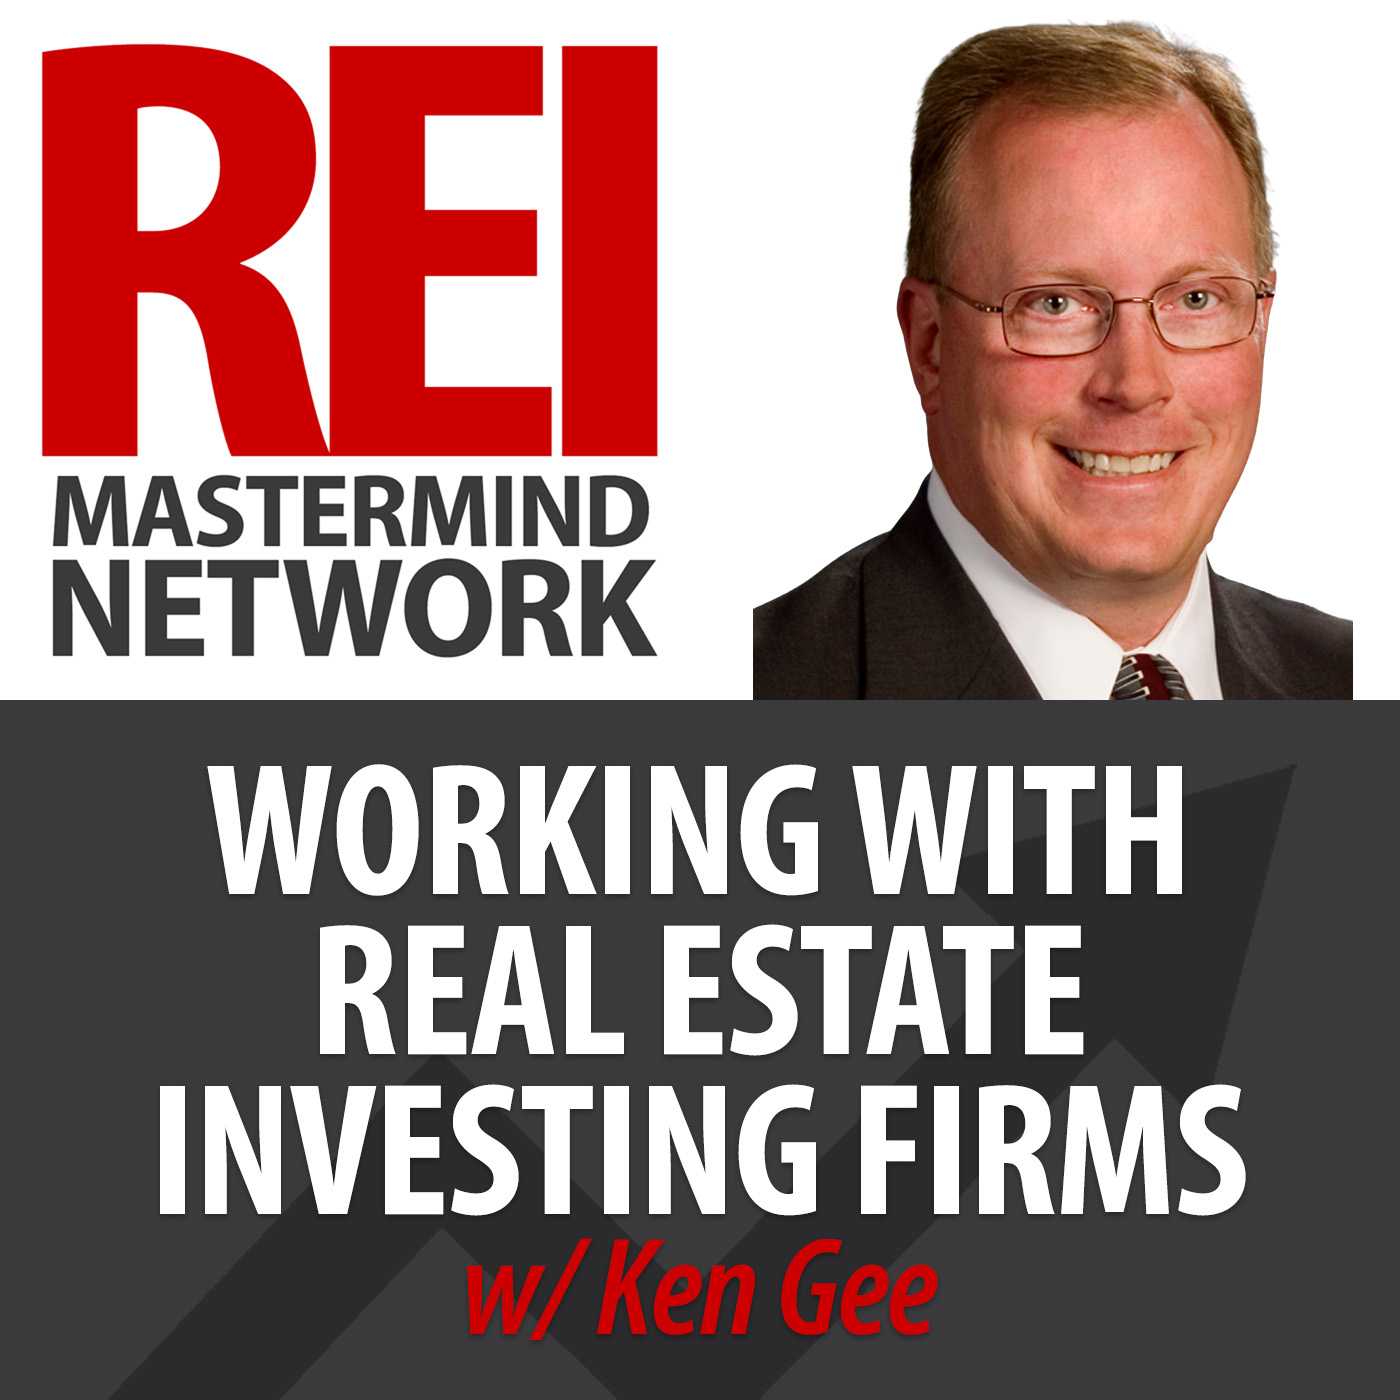 Working with Real Estate Investing Firms with Ken Gee